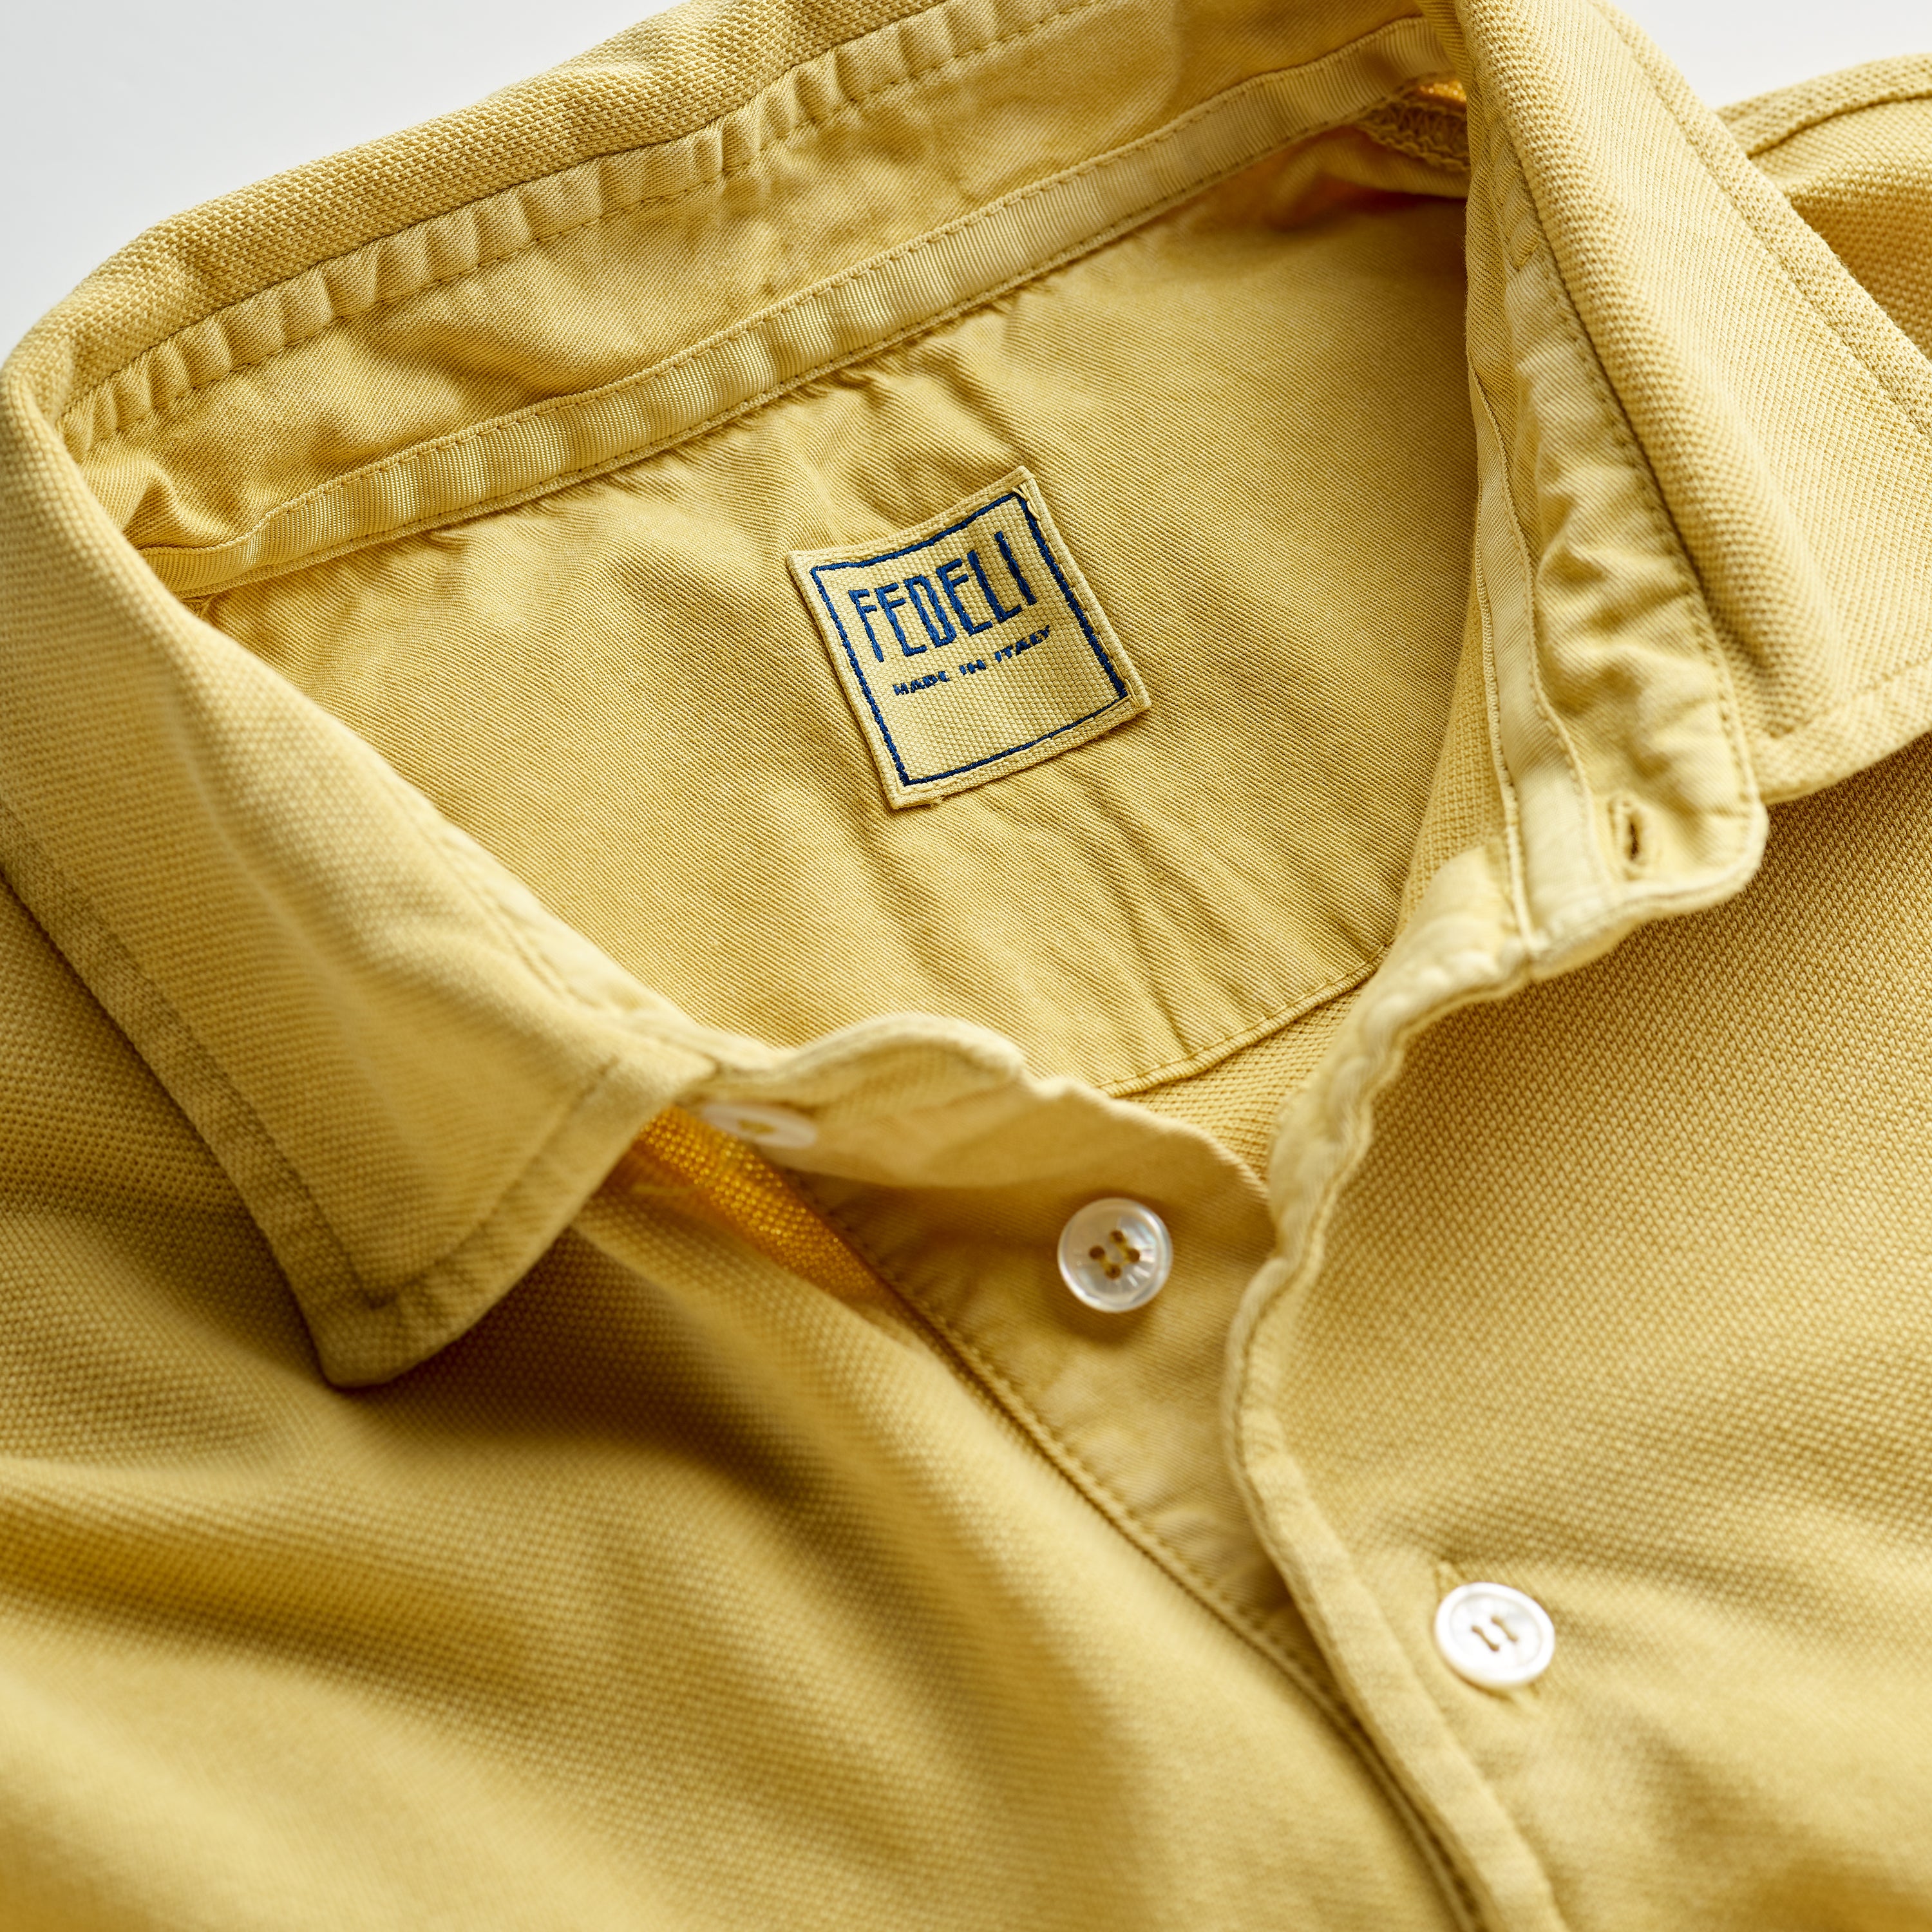 Fedeli Classic Short Sleeve Knitted Pique Polo Shirt in Mustard Yellow Collar